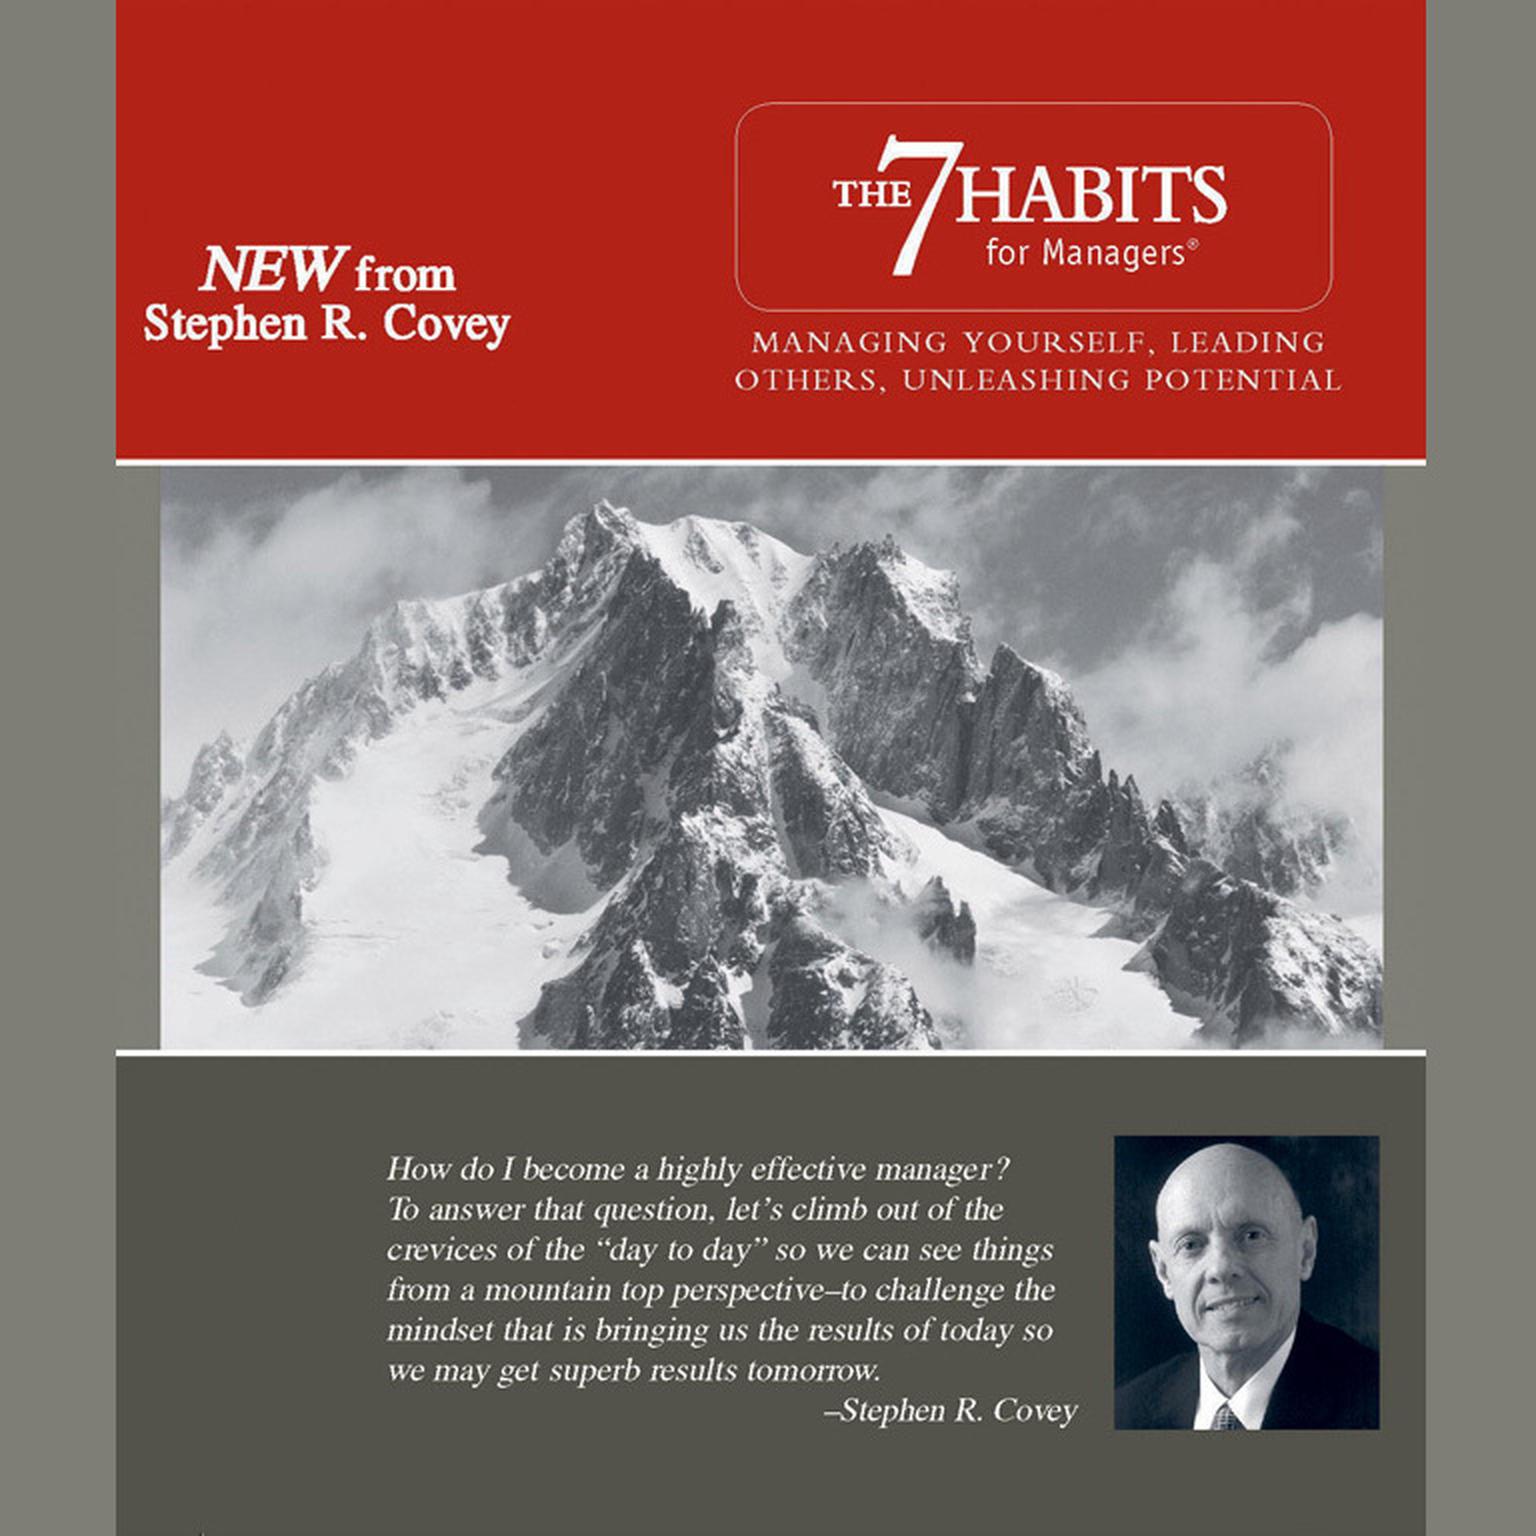 The 7 Habits for Managers (Abridged): Managing Yourself, Leading Others, Unleashing Potential Audiobook, by Stephen R. Covey